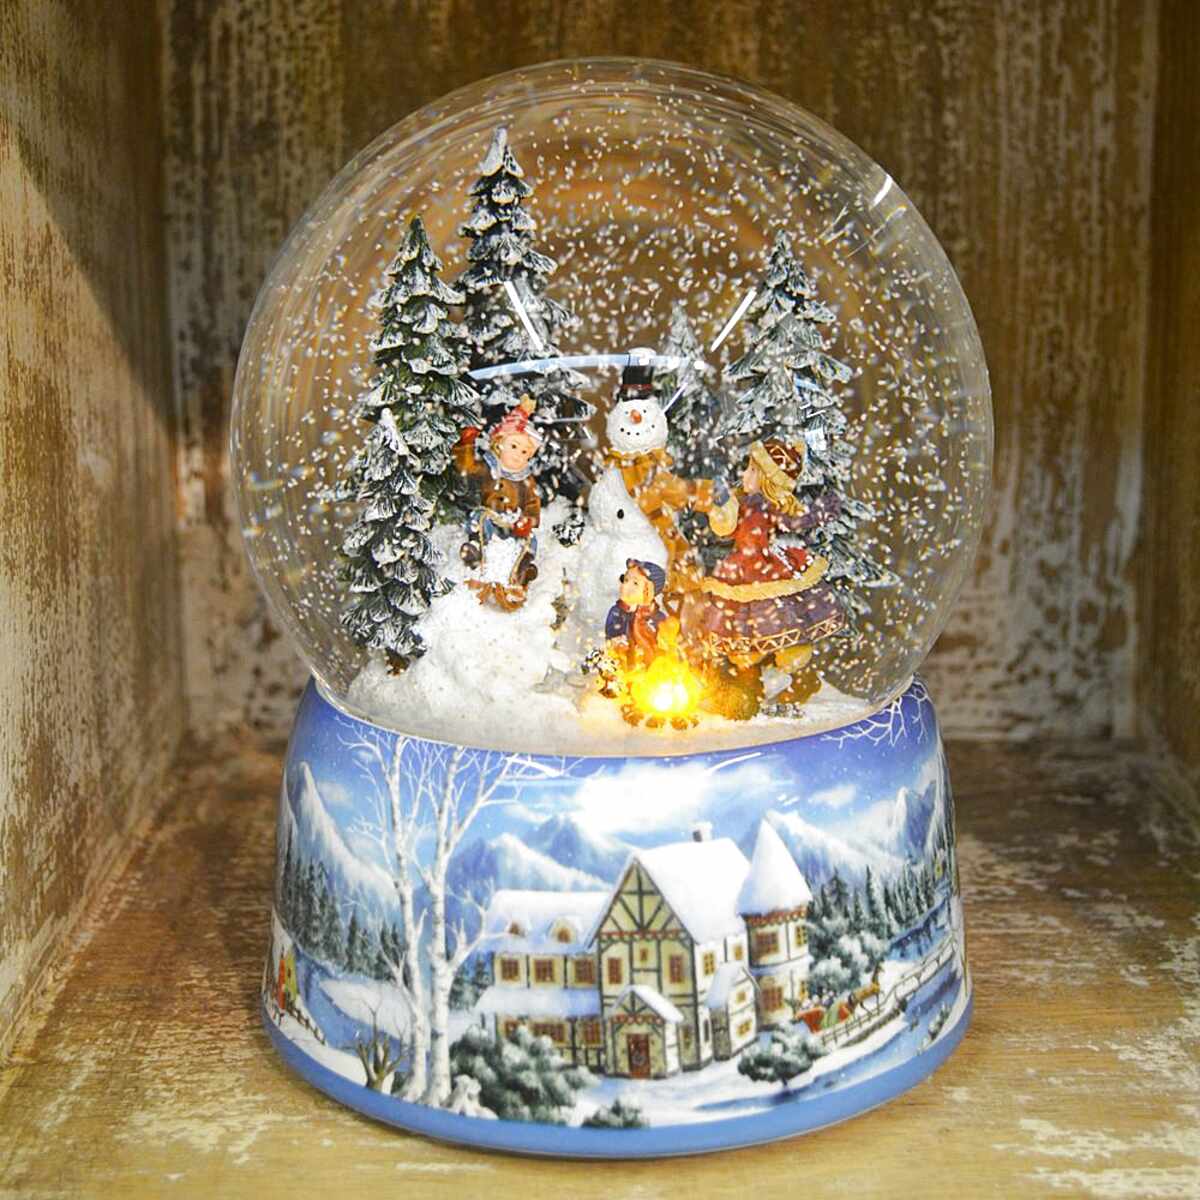 xmas snow globes with picture frame in it